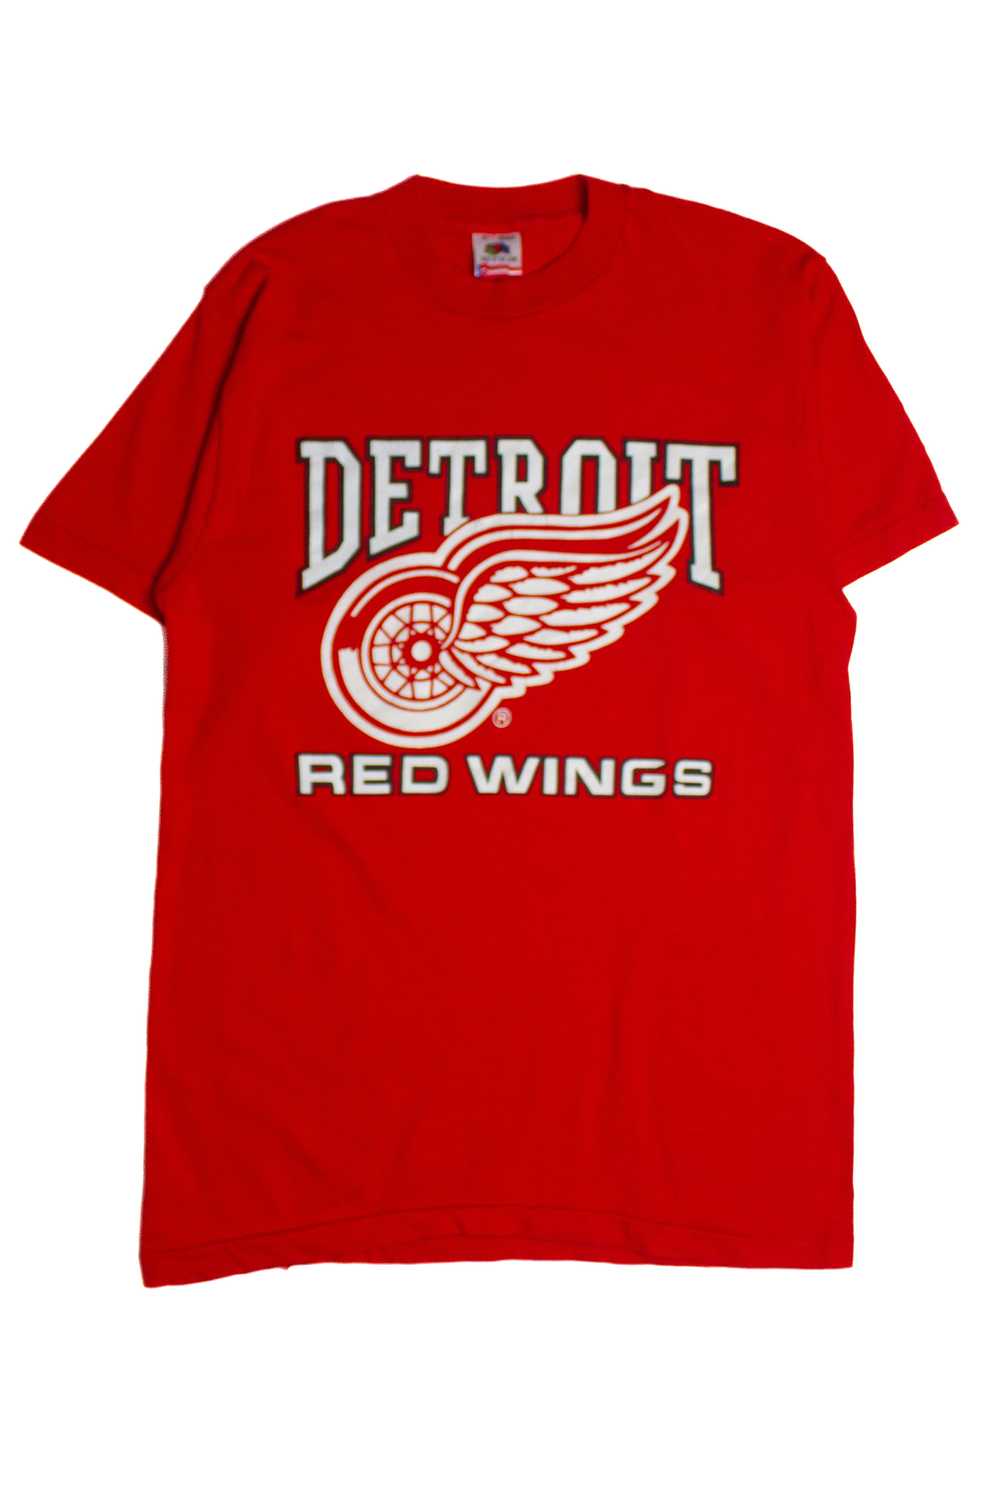 Vintage Detroit Red Wings T-Shirt (1990s) 9460 - image 1